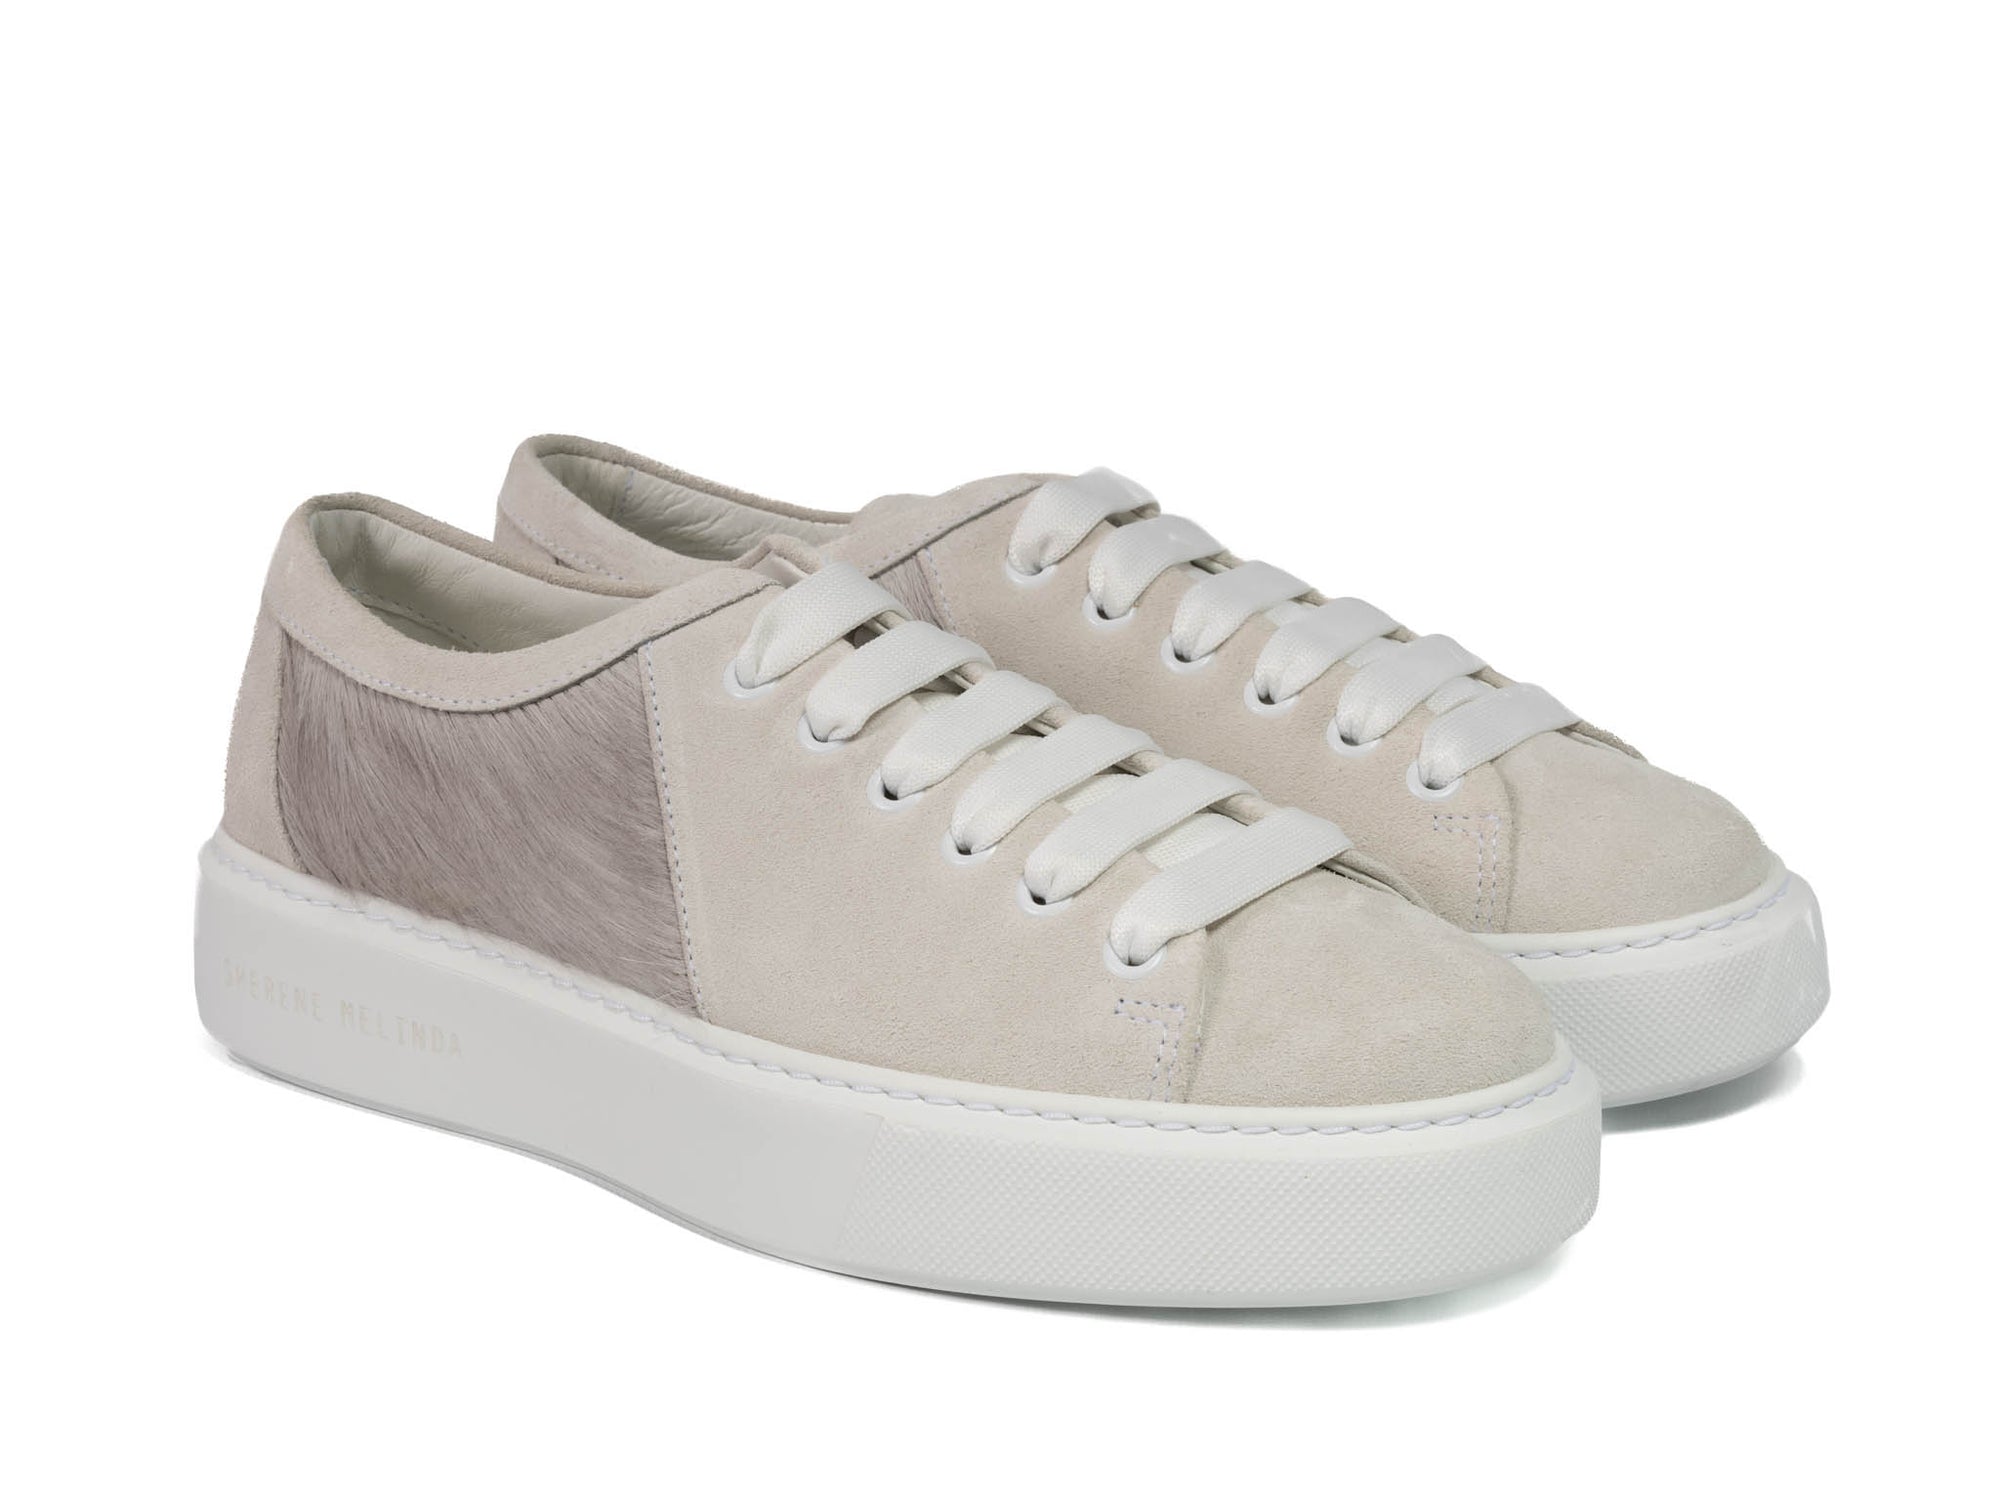 Grey Hair-on-hide Trainer Model 001 with White Suede